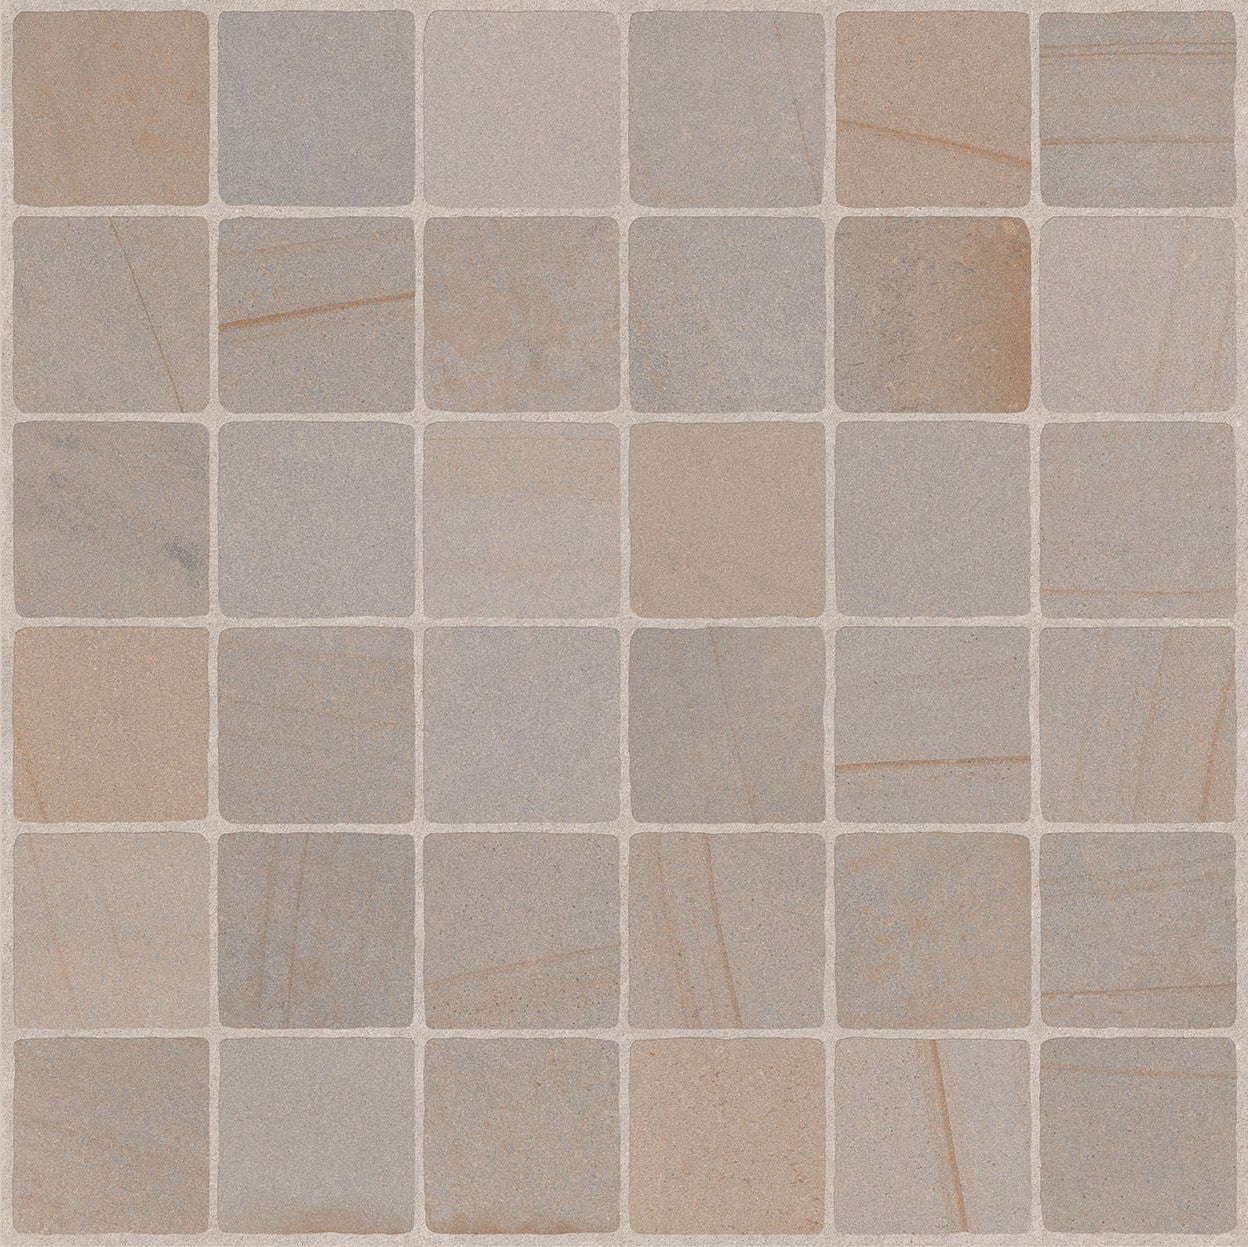 surface group international frontier 20 porcelain paving tile bluestone full color cobblestone cube 24x24 for outdoor application manufactured by landmark